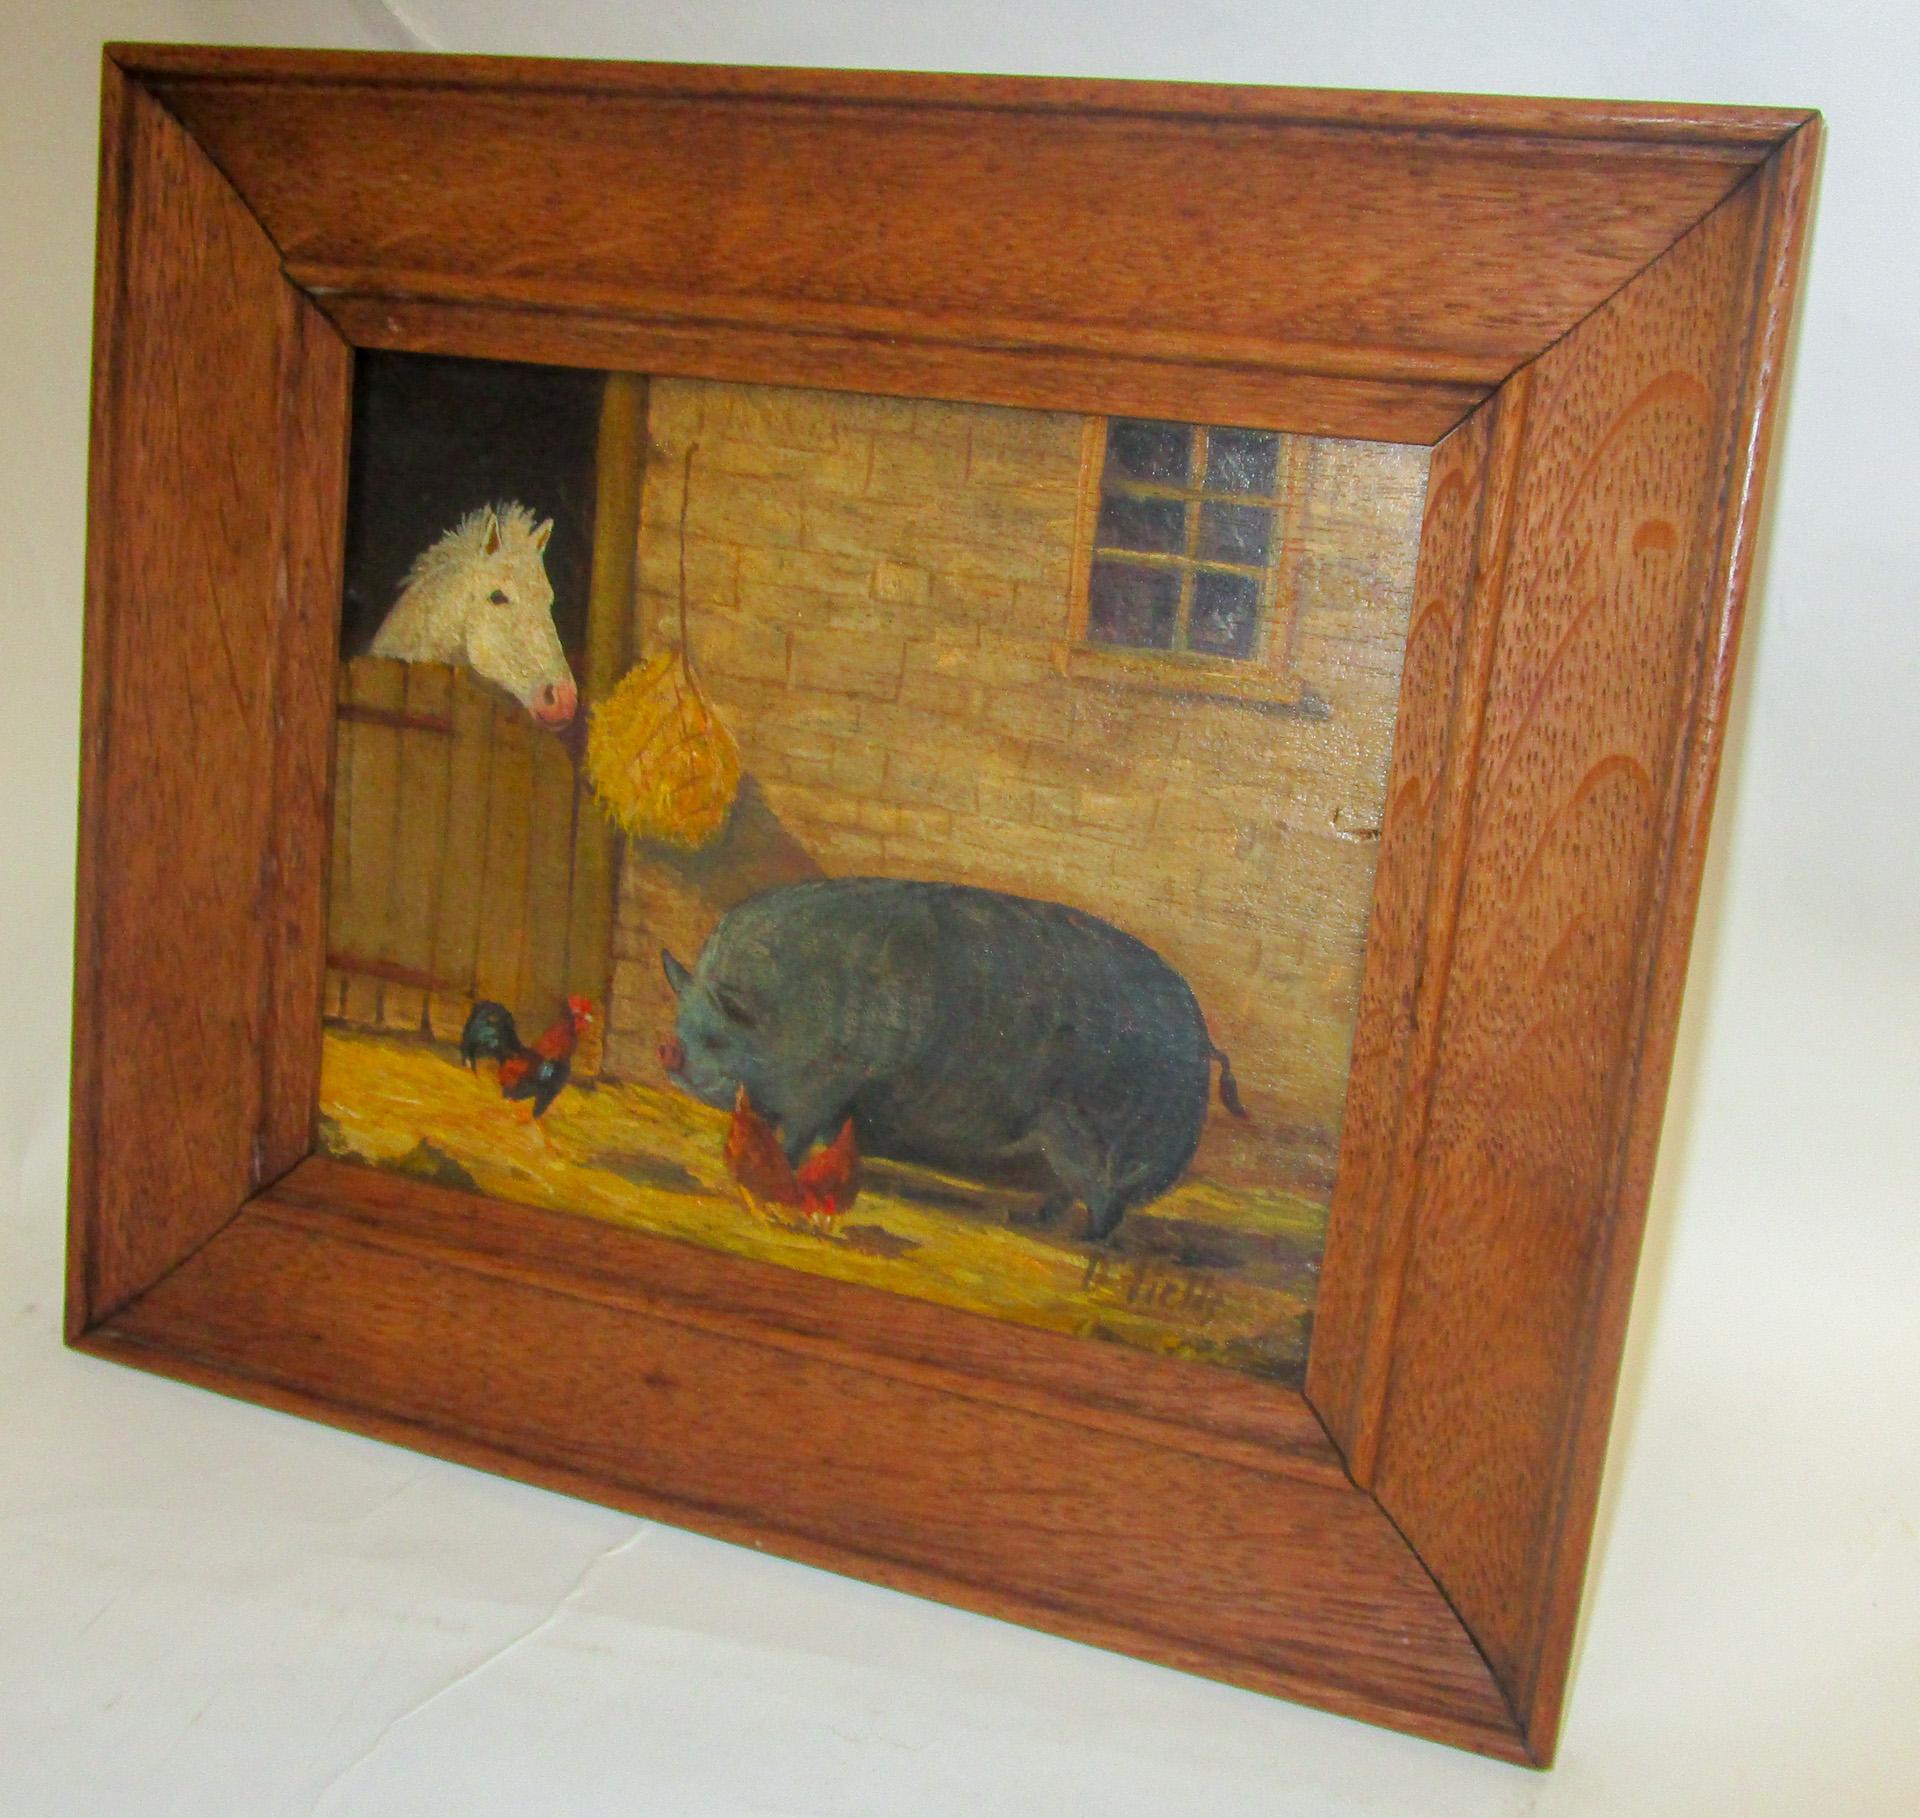 This charming Primitive small size, 7.50 inches x 5.75 inches, oil on board features a hefty black pig, a curious white horse, two chickens and a rooster. Signed D'Fields in lower right corner. In original oak frame with framers card, S.J. Wiseman,